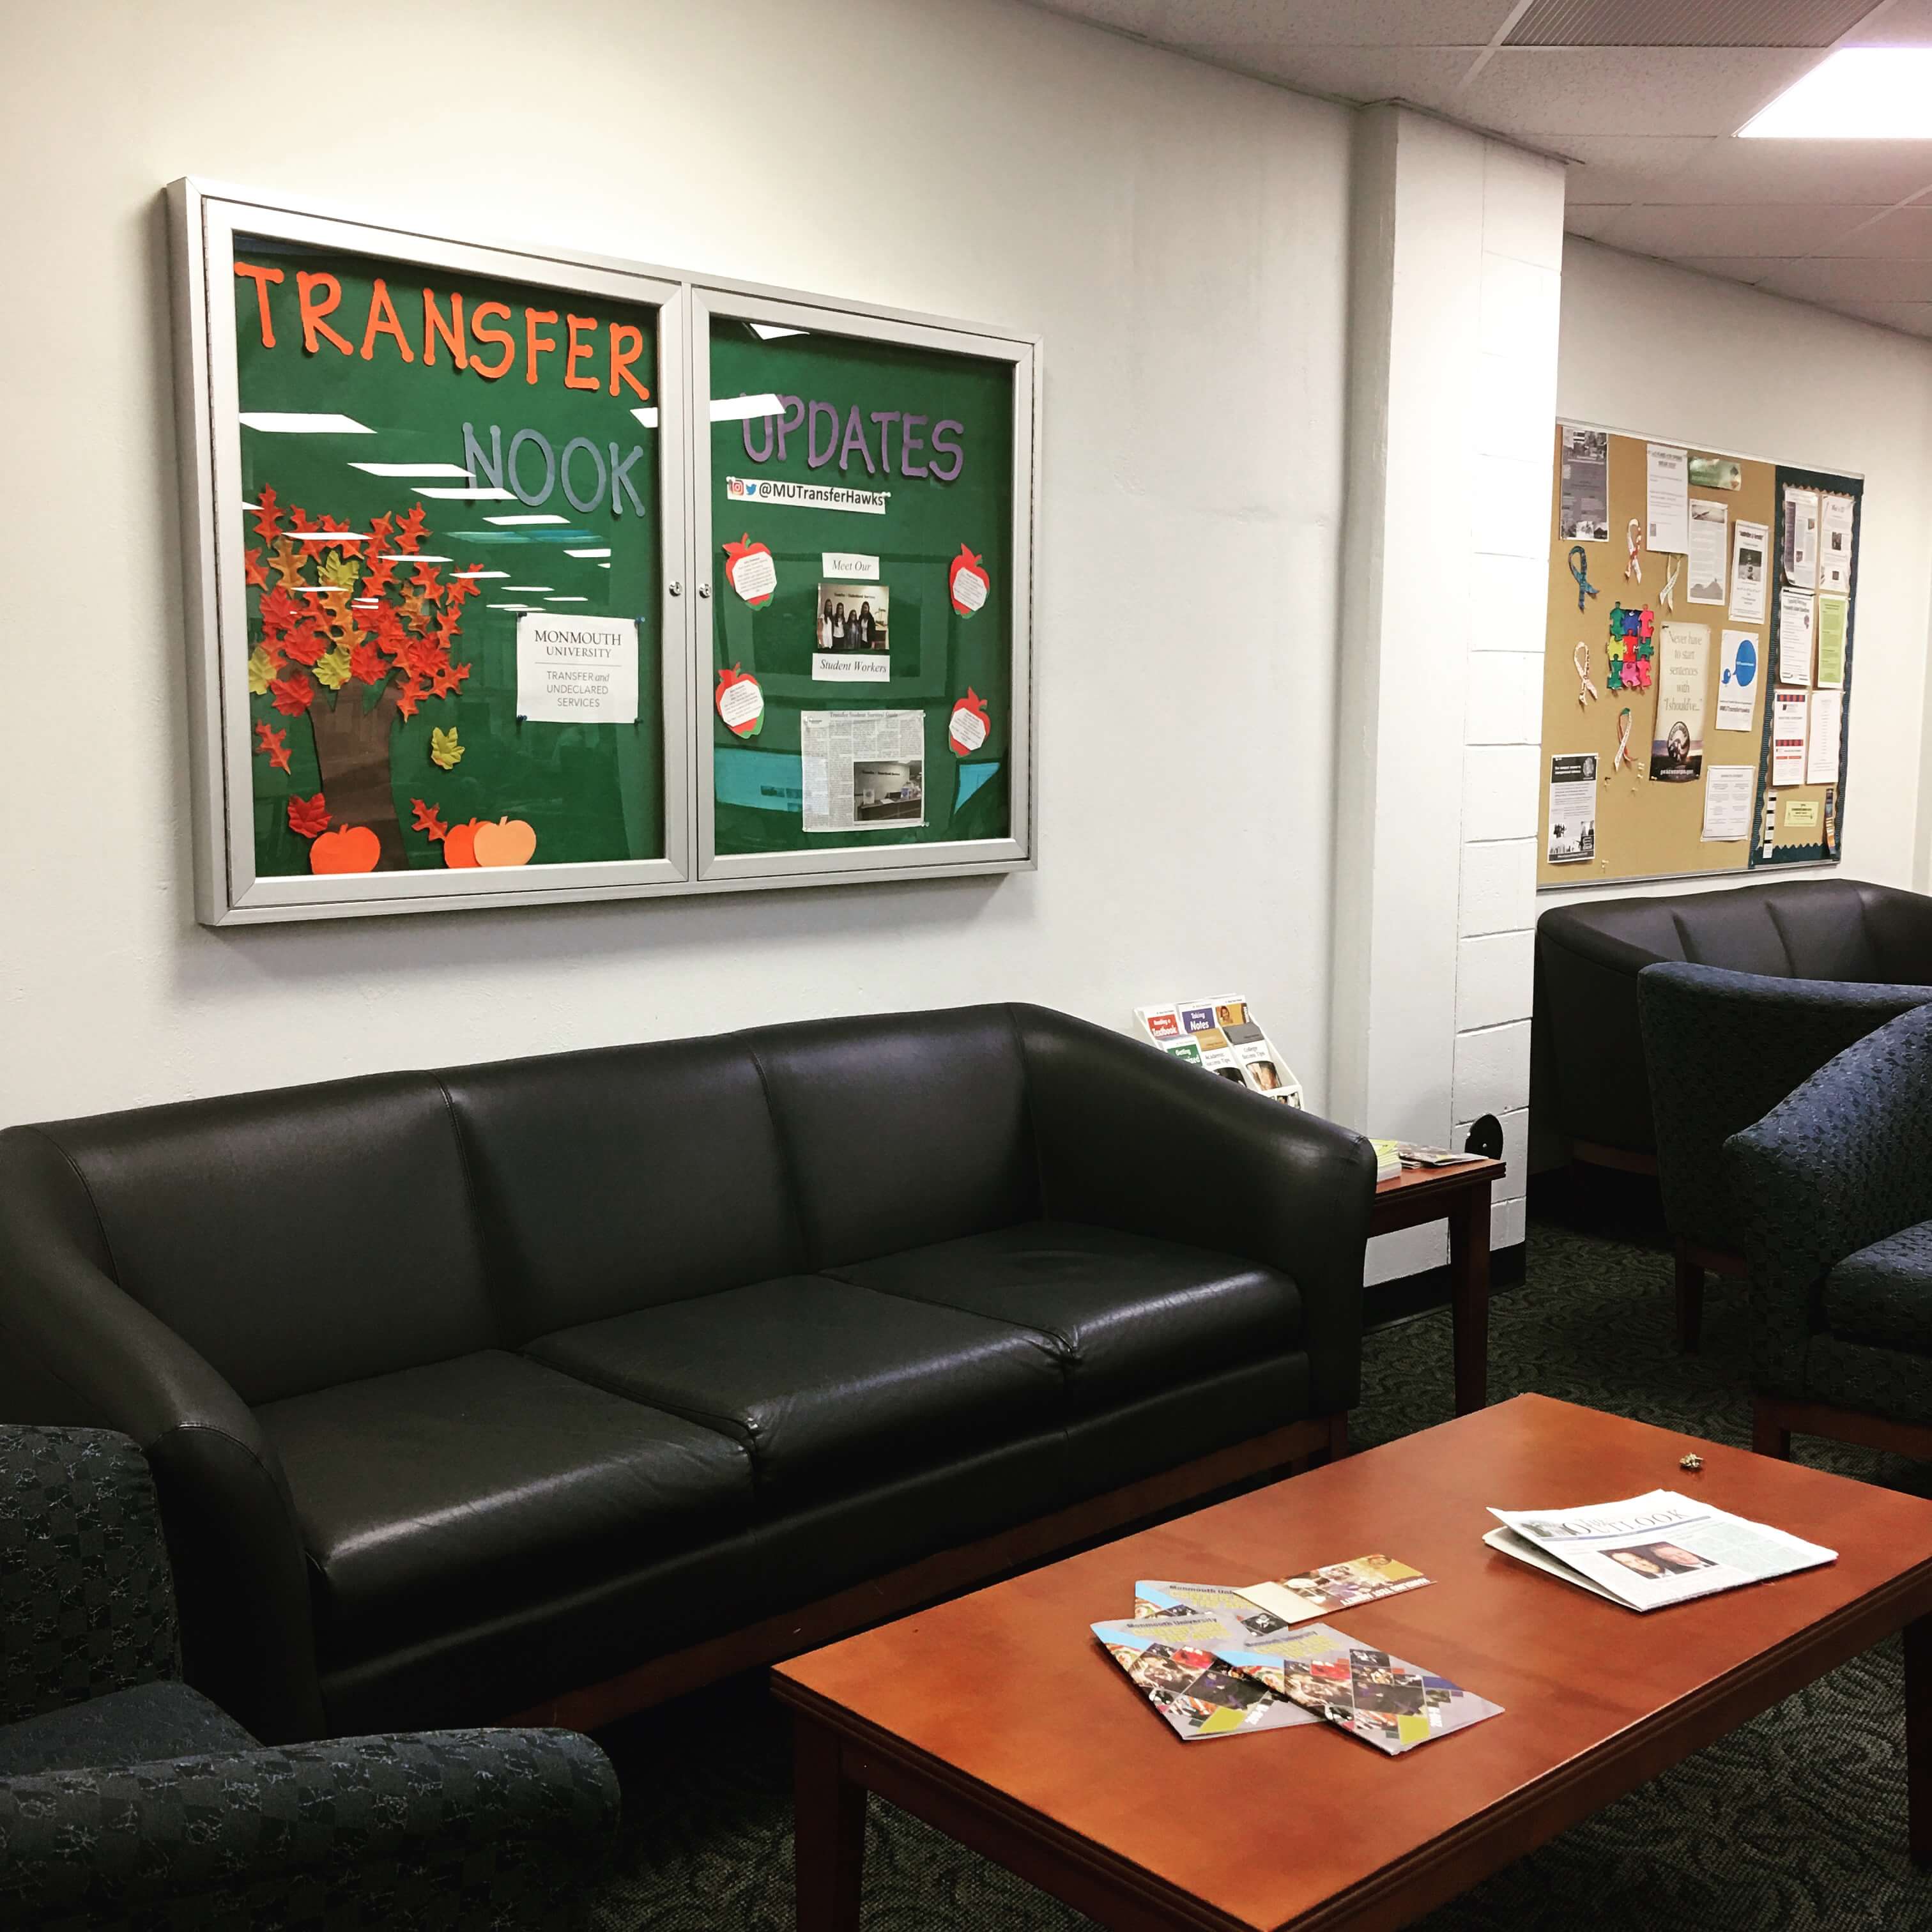 A photo of the transfer Student Nook